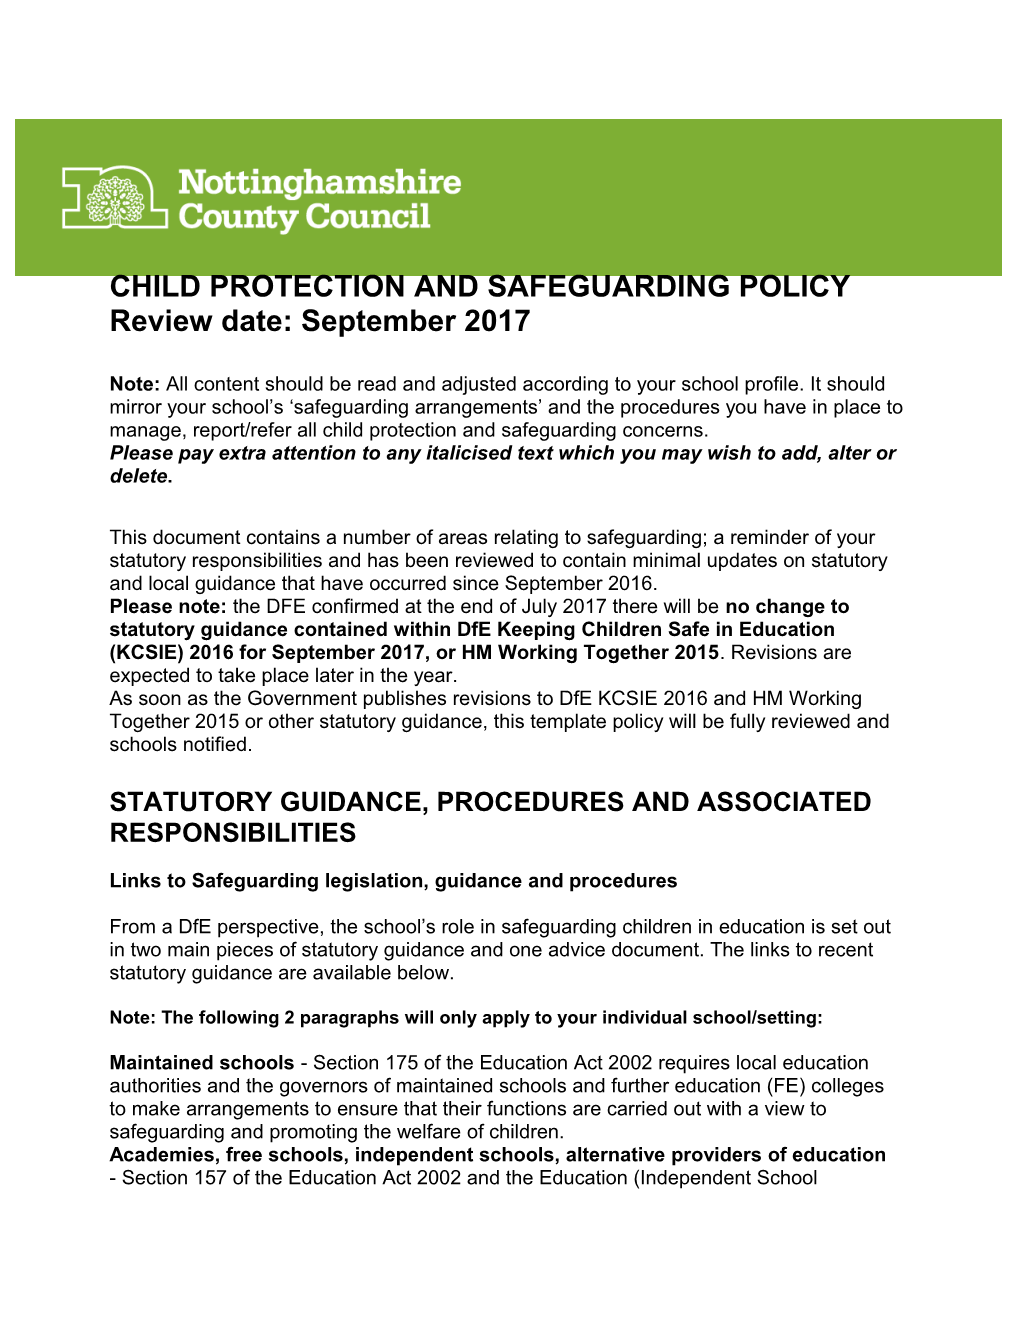 CHILD PROTECTION and SAFEGUARDING POLICY Review Date:September 2017